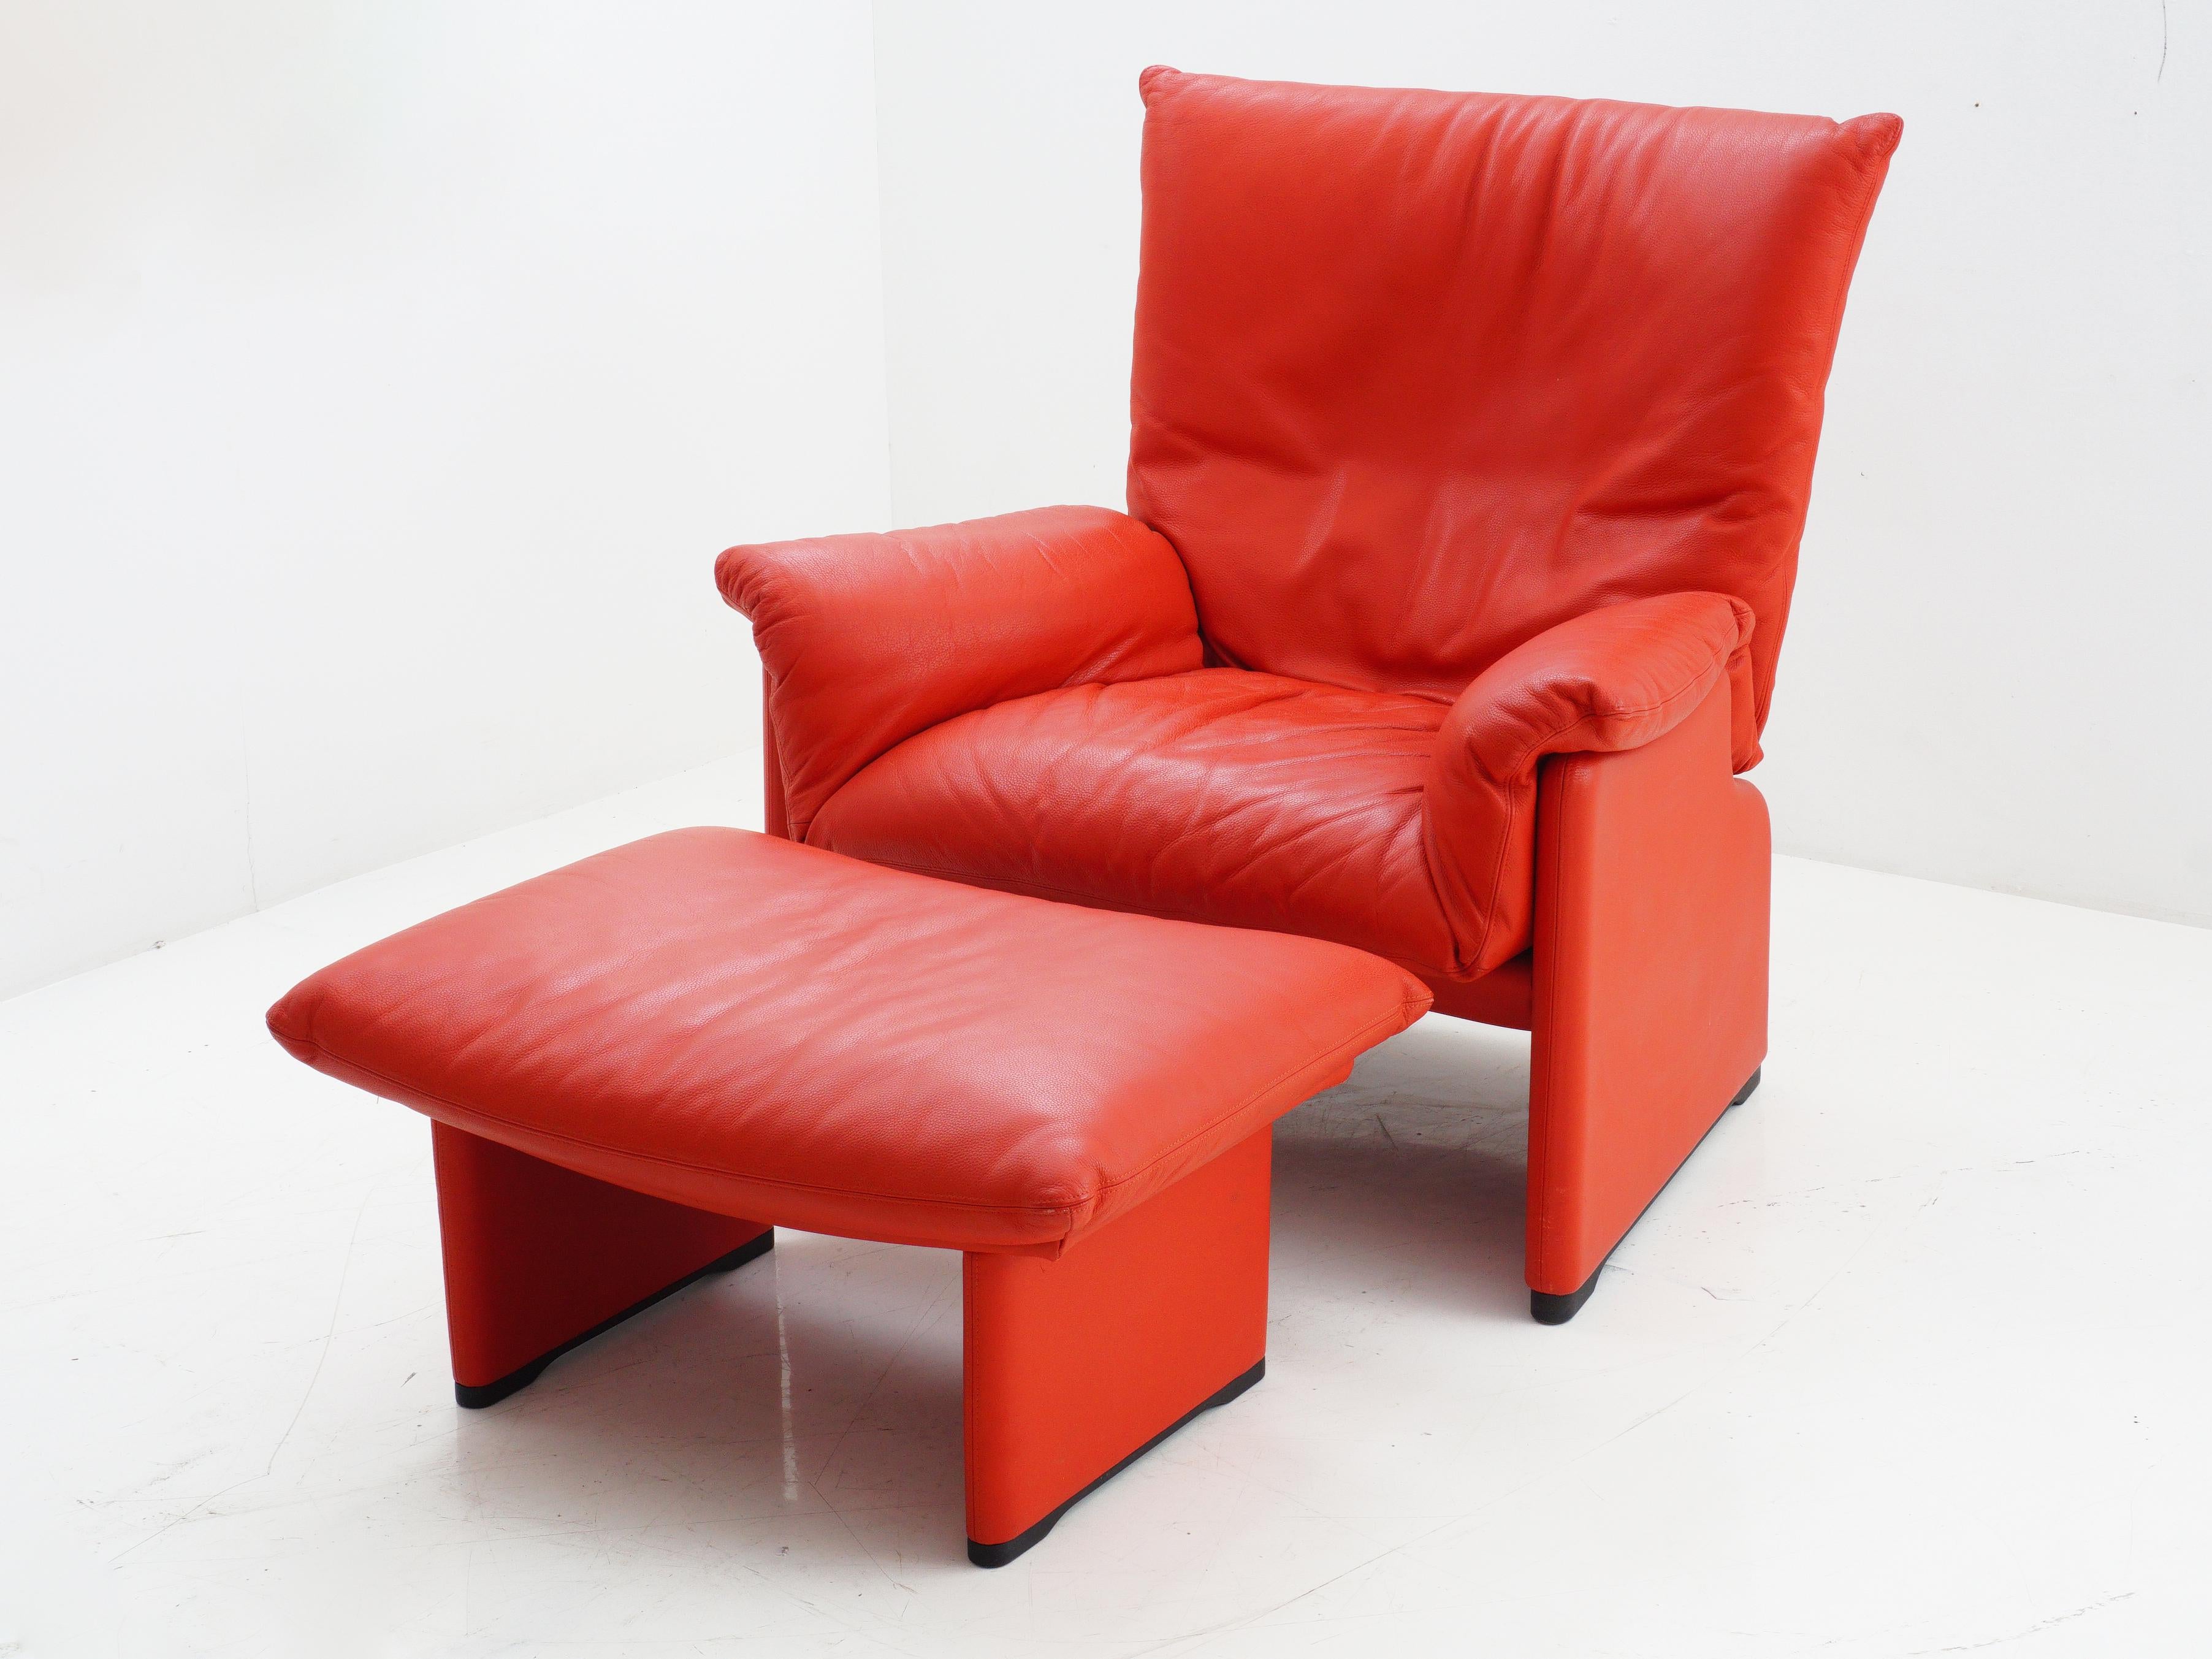 Picture this: You just finished an exhausting work day. You walk into your living room, sink into a sophisticated and equally comfortable lounge chair, and put your feet up on the ottoman. You let out a sigh of relief. This vintage Italian red